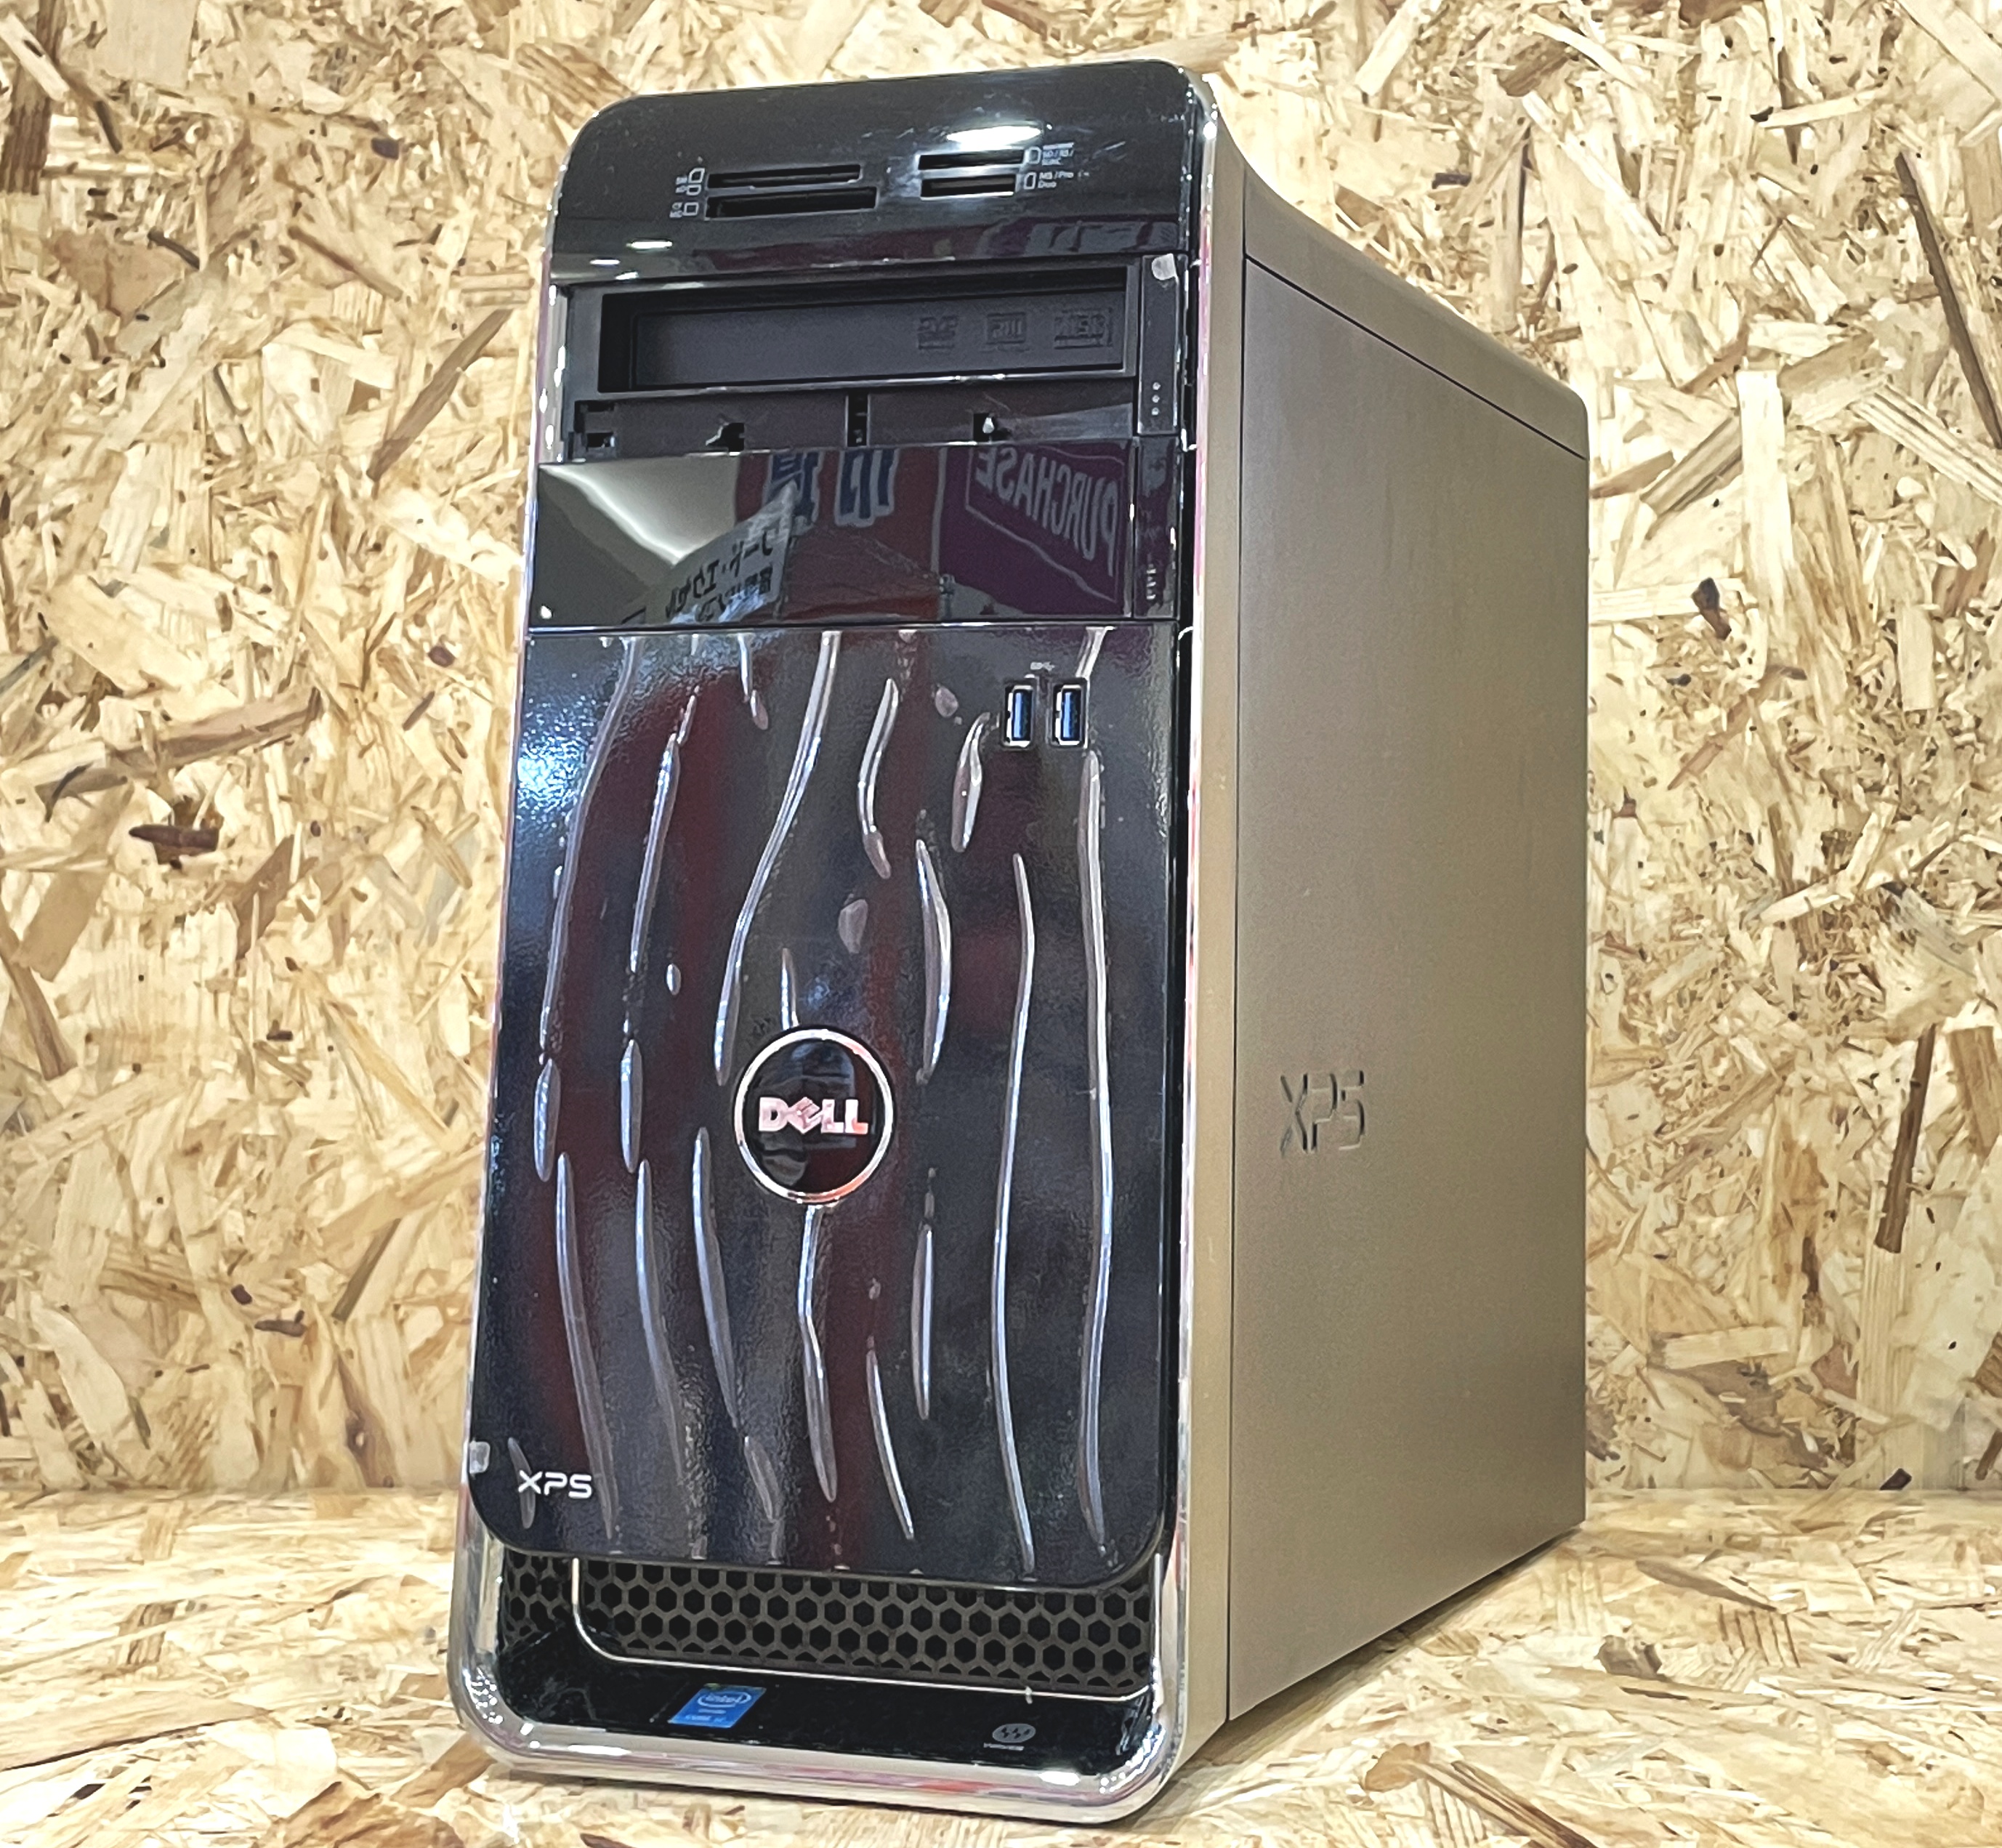 DELL XPS 8700 Series CPU:Corei7 4790 3.06GHz / 16GB / SSD:240GB+